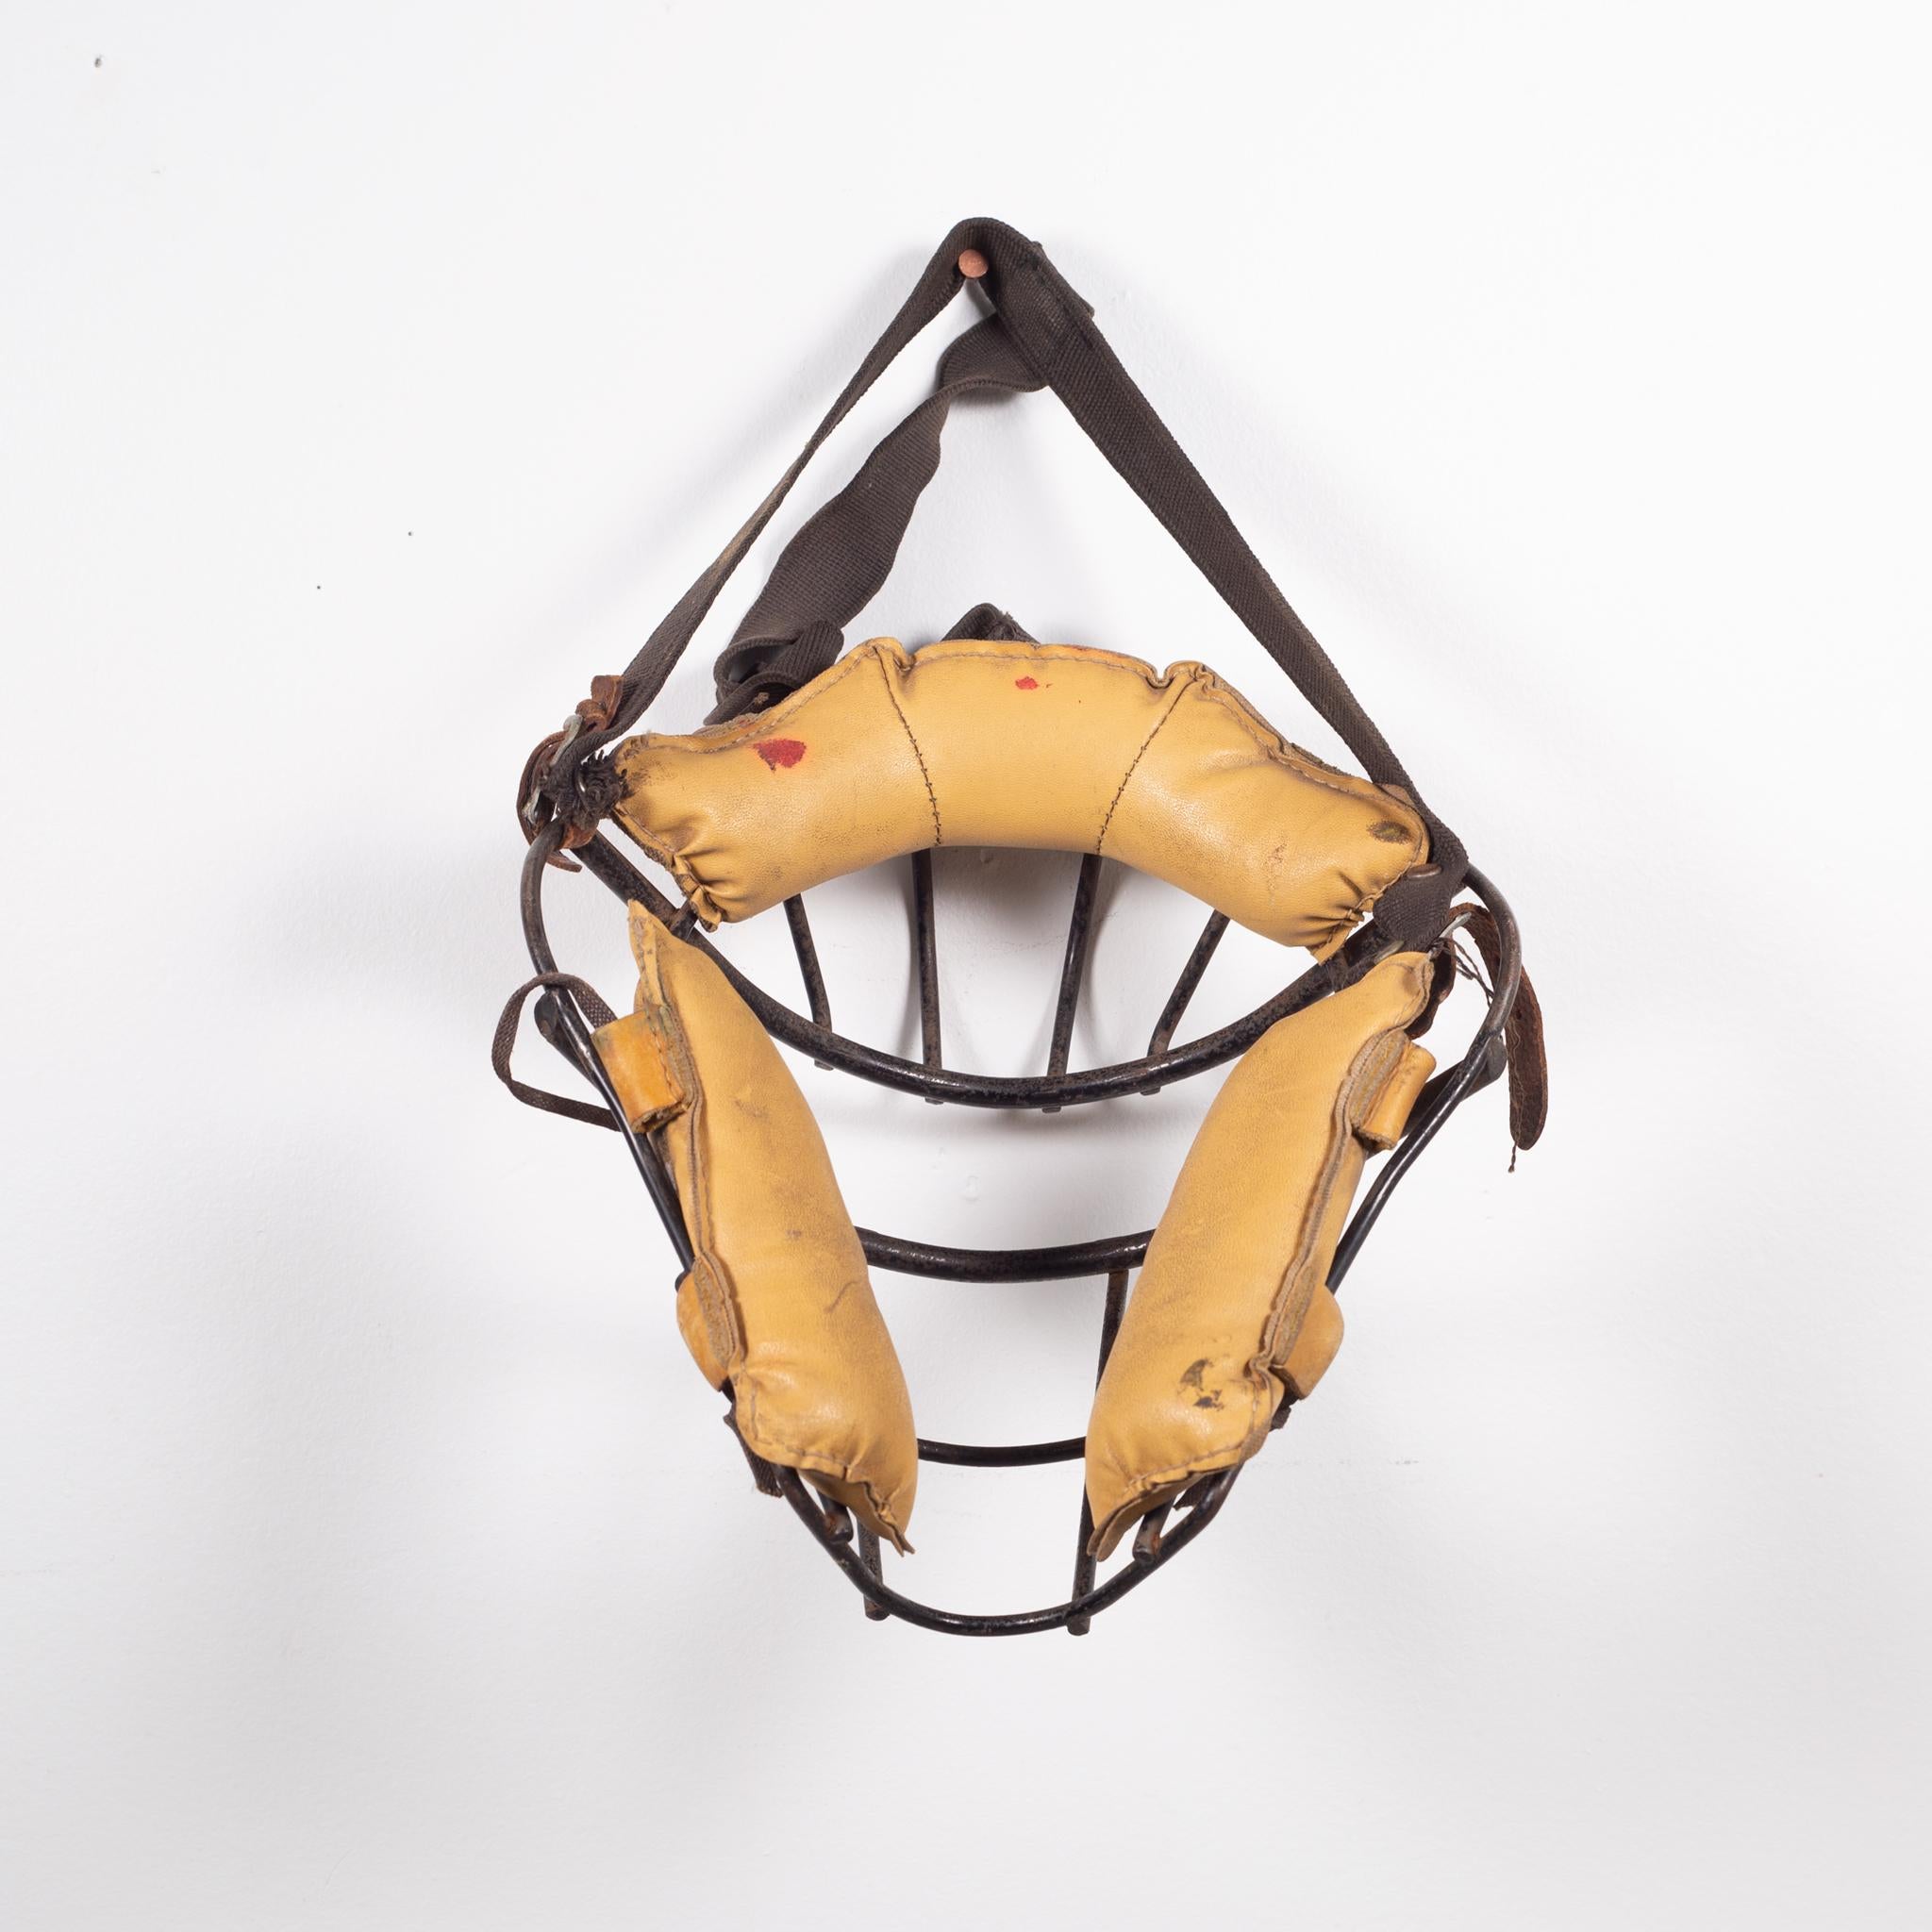 American Early 20th C. Steel and Leather Catcher's Mask c.1940